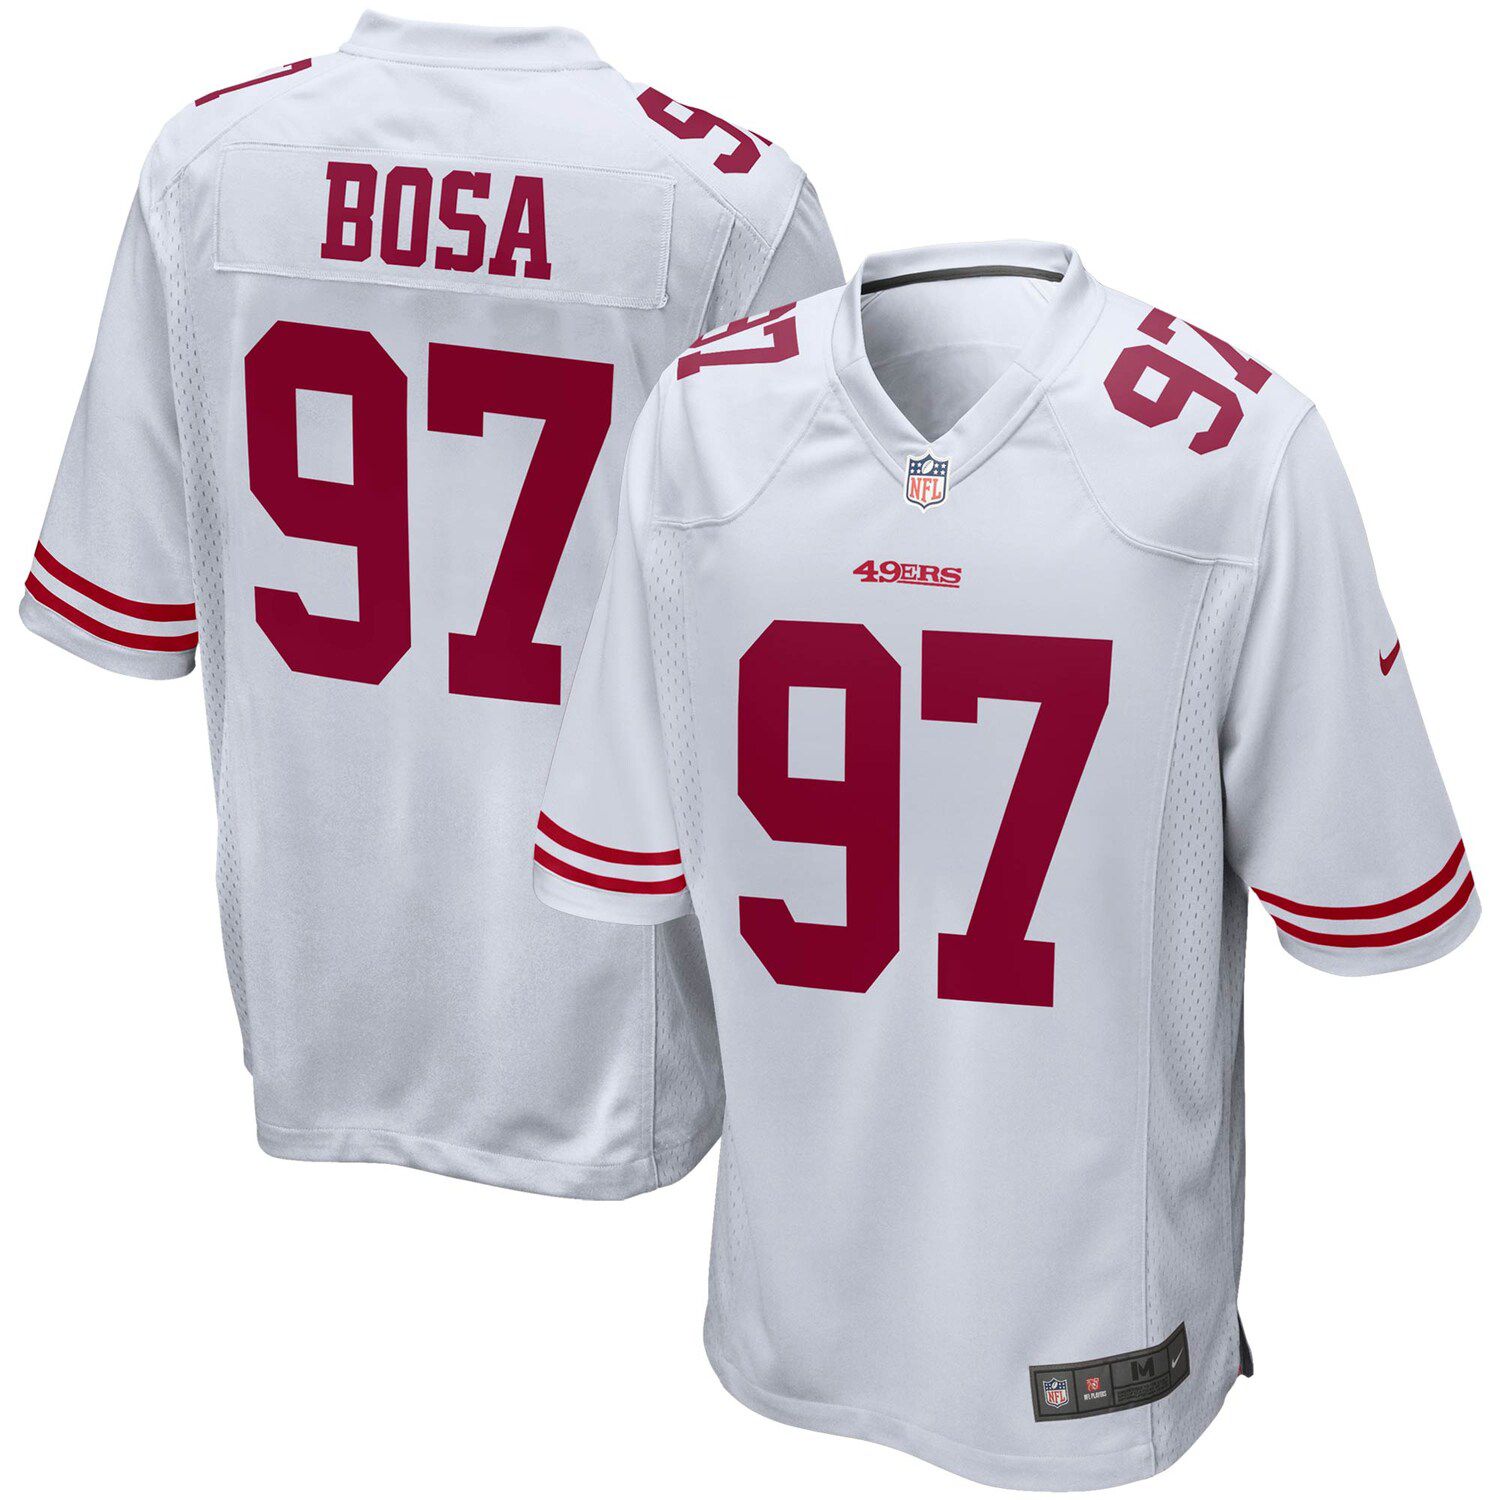 black and red bosa jersey